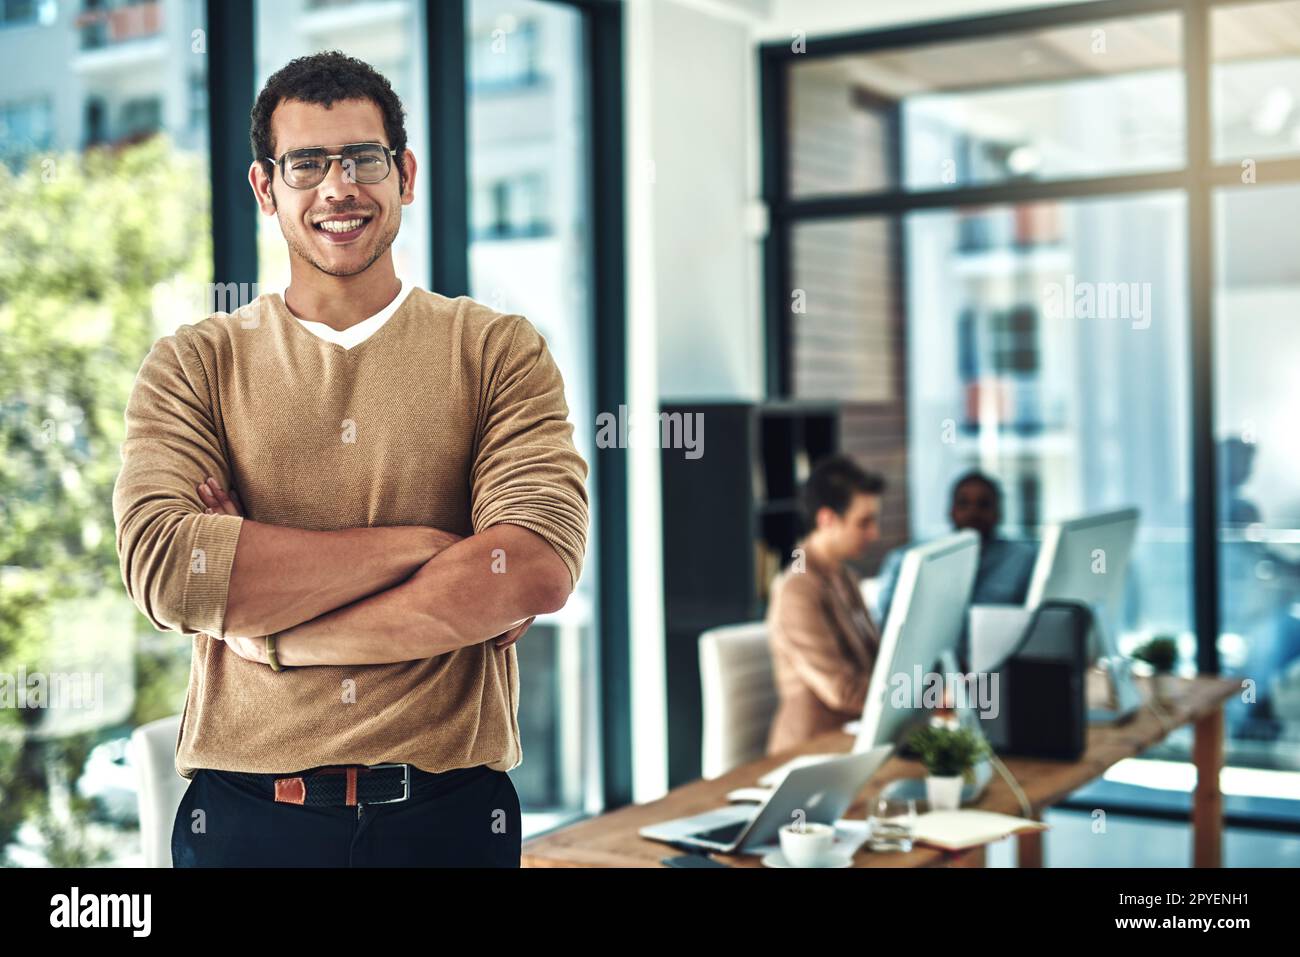 Im finally achieving all my goals. a designer posing in the office with colleagues blurred in the background. Stock Photo